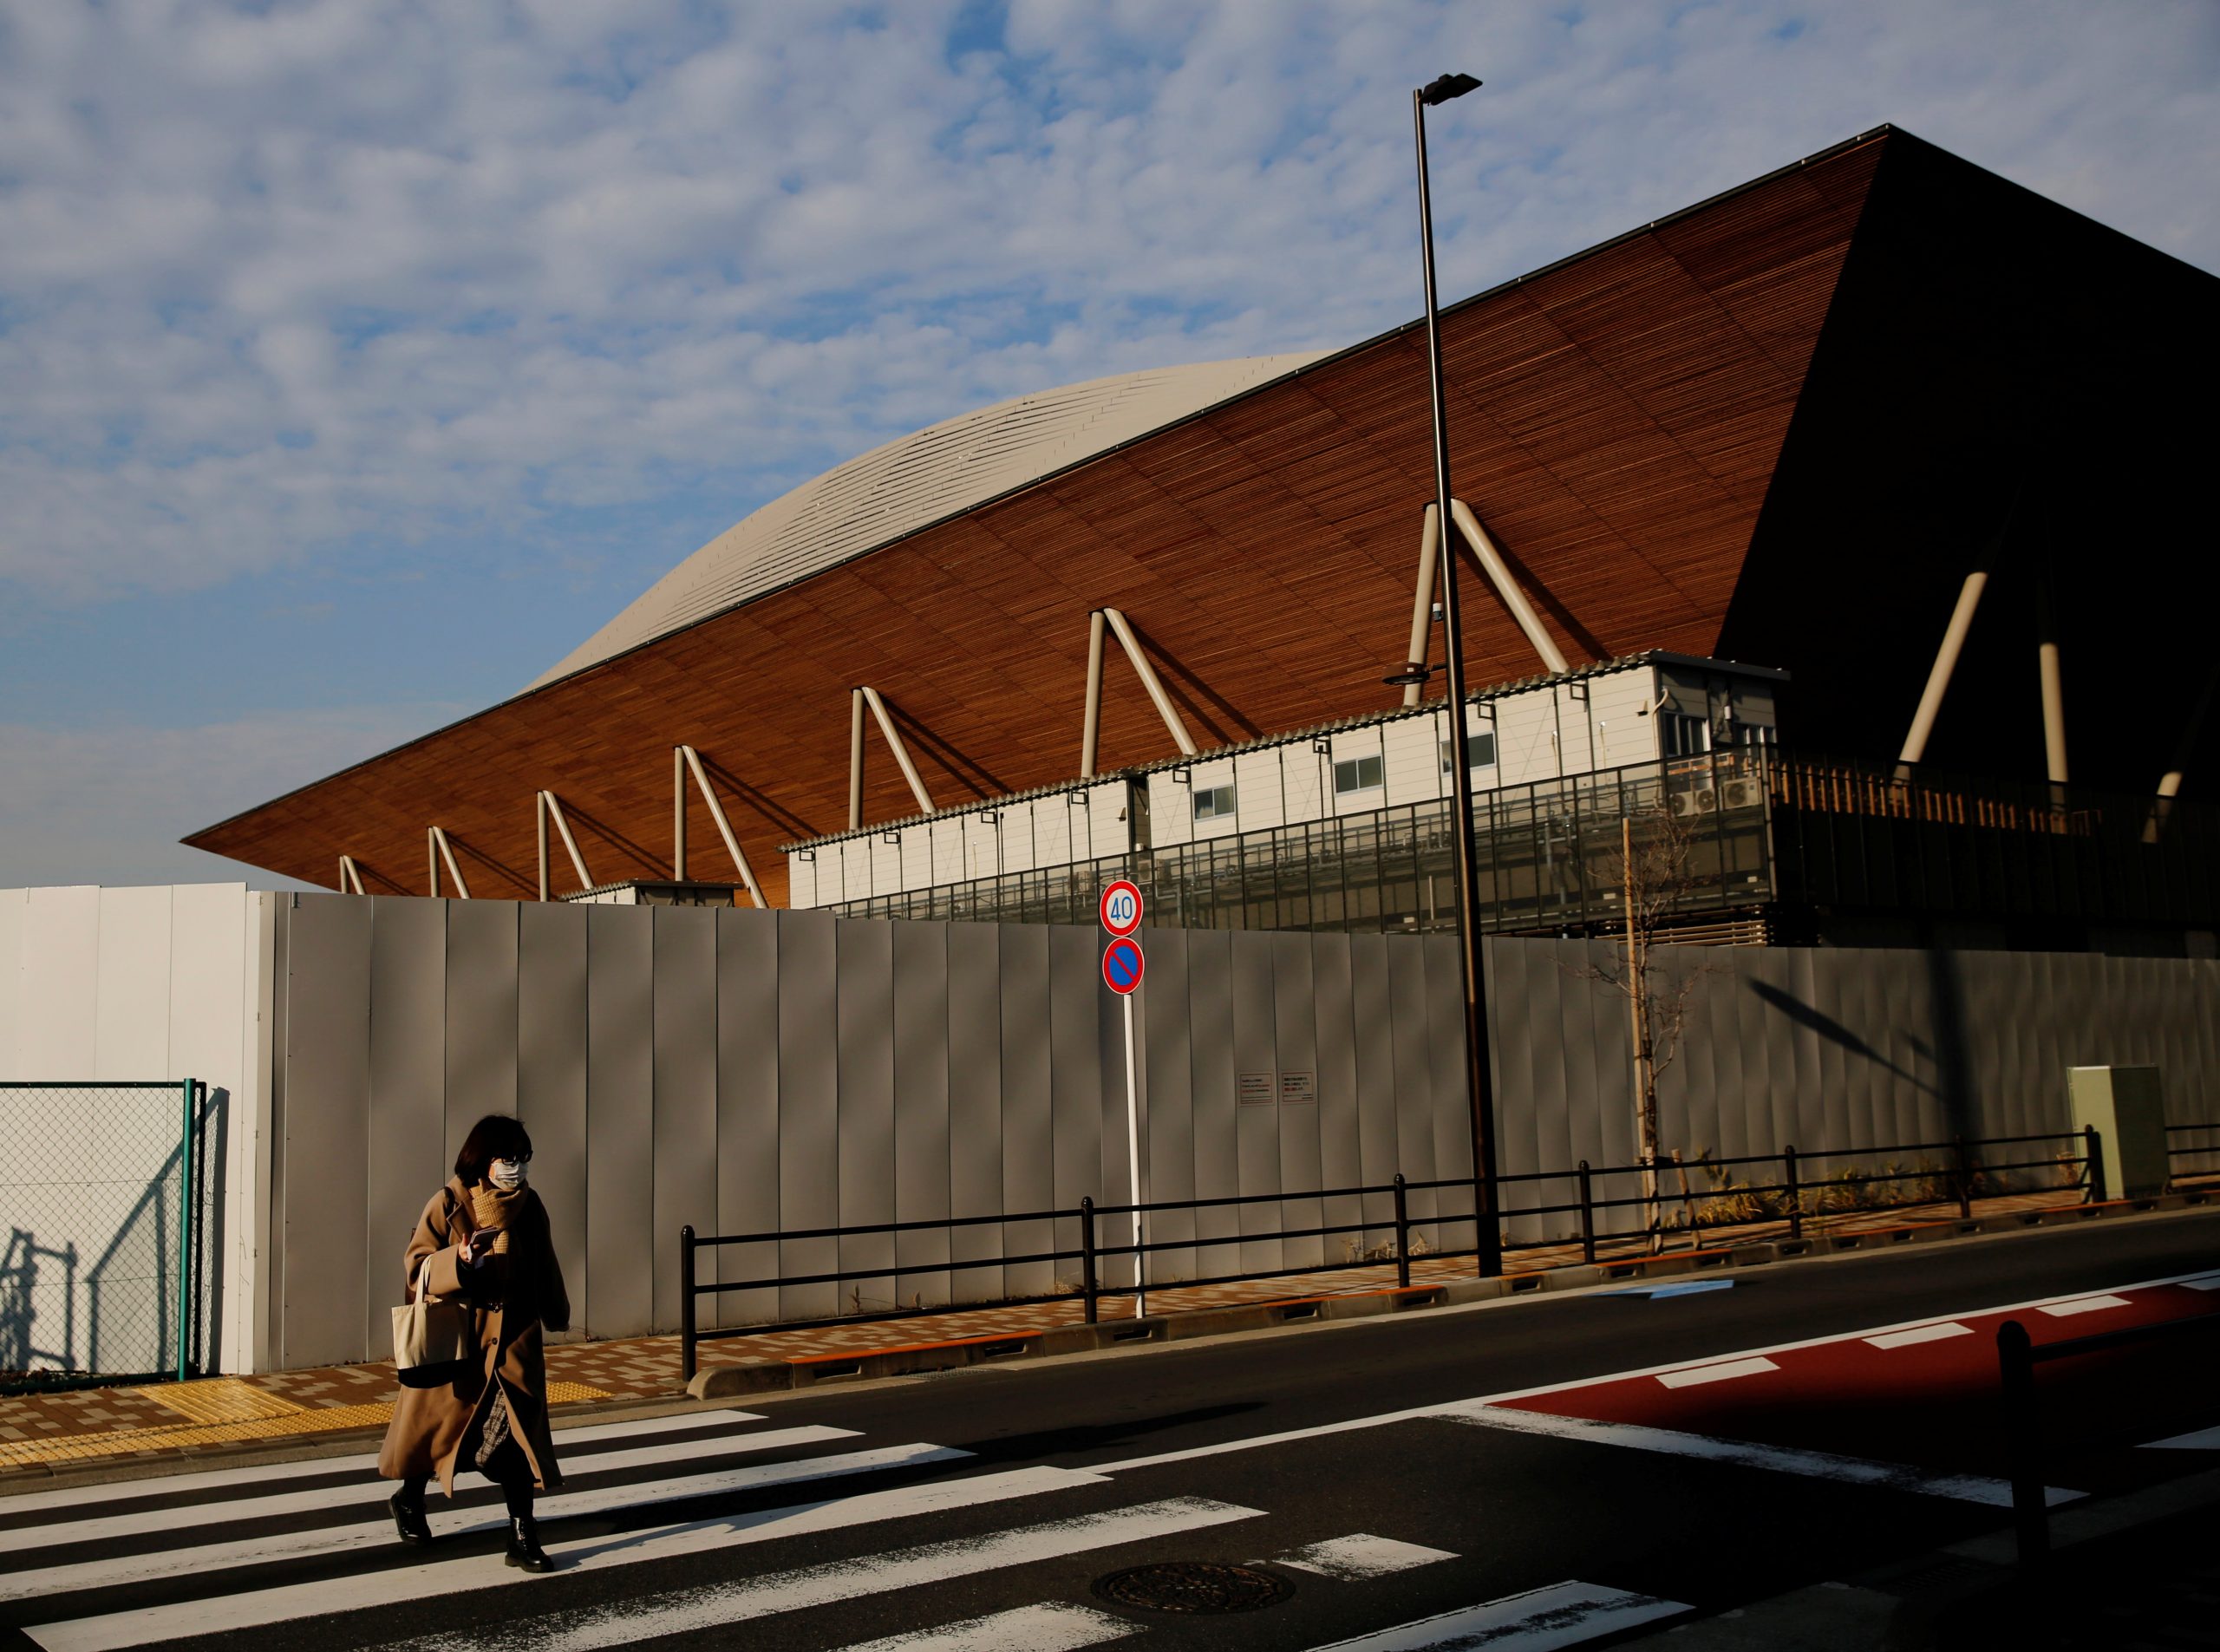 Ariake Gymnastics Centre for the Tokyo 2020 Olympic Games, amid the coronavirus disease (COVID-19) outbreak, in Tokyo A woman wearing a protective mask walks past Ariake Gymnastics Centre for the Tokyo 2020 Olympic Games, amid the coronavirus disease (COVID-19) outbreak, in Tokyo, Japan, January 22, 2021. REUTERS/Kim Kyung-Hoon KIM KYUNG-HOON